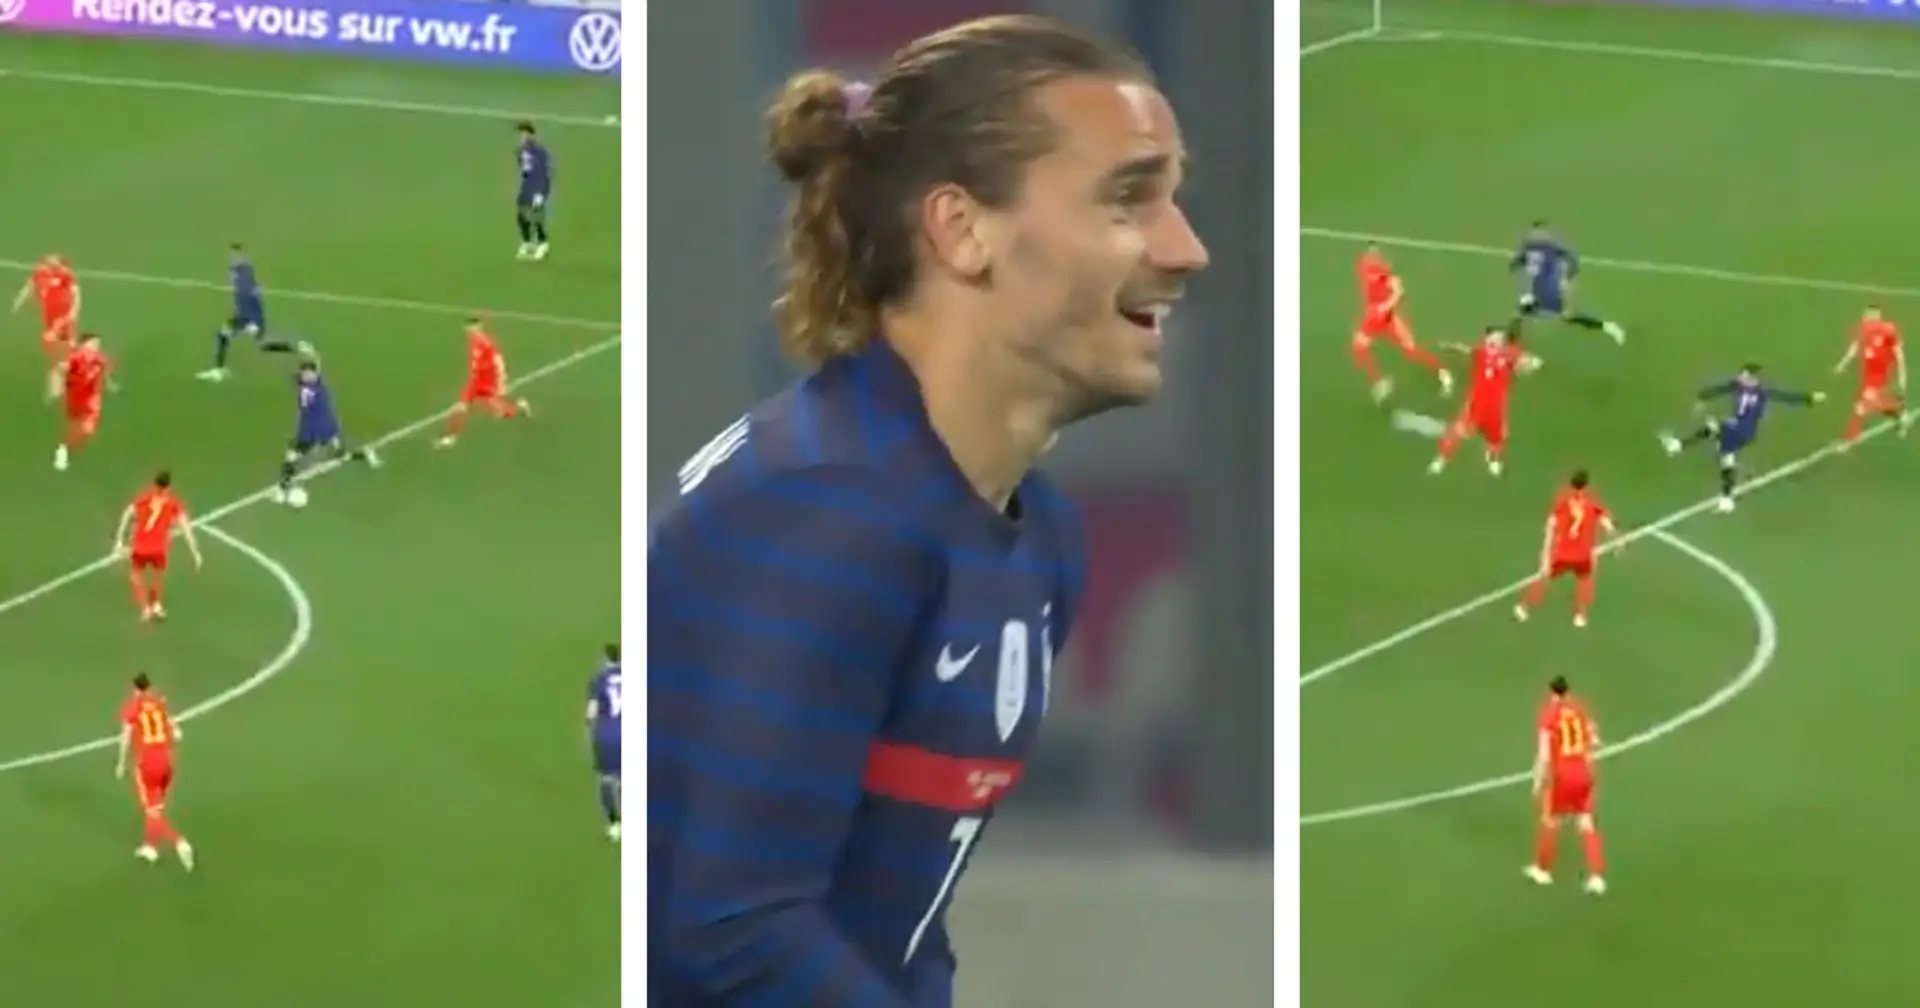 Just in: Griezmann's amazing goal vs Wales (video)